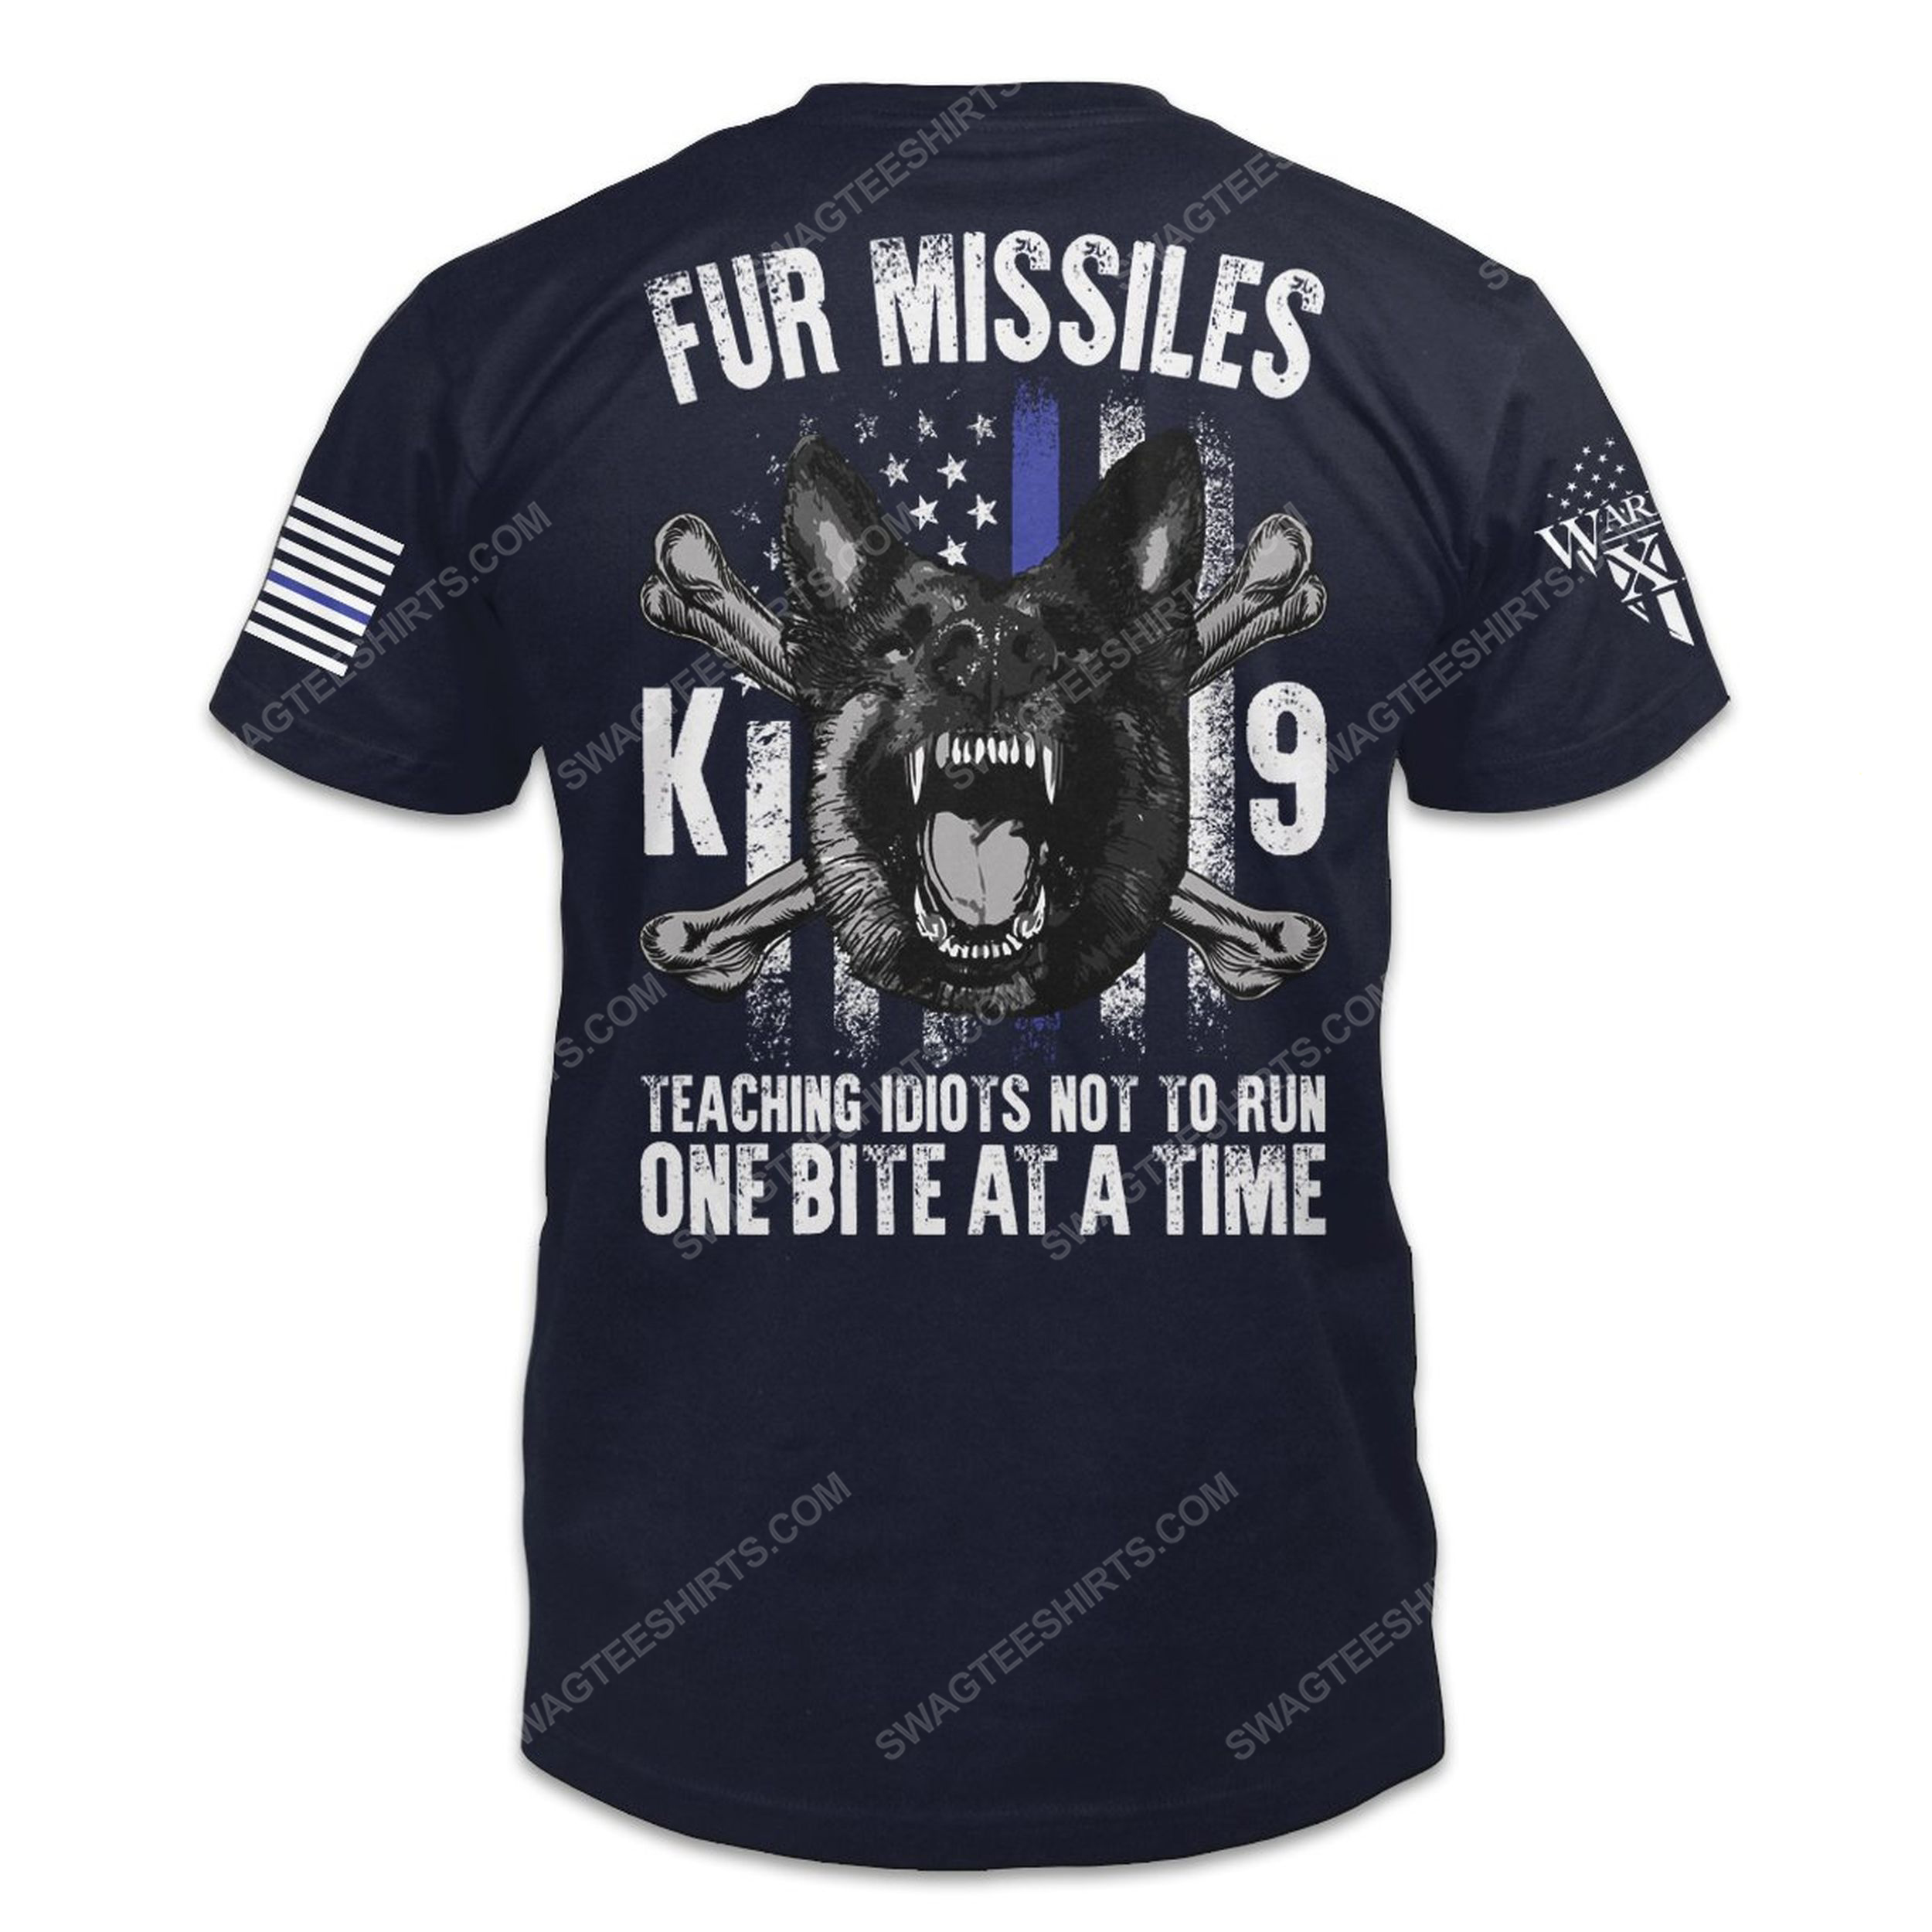 Fur missiles teaching idiots not to run one bite at a time police k9 shirt 2(1)